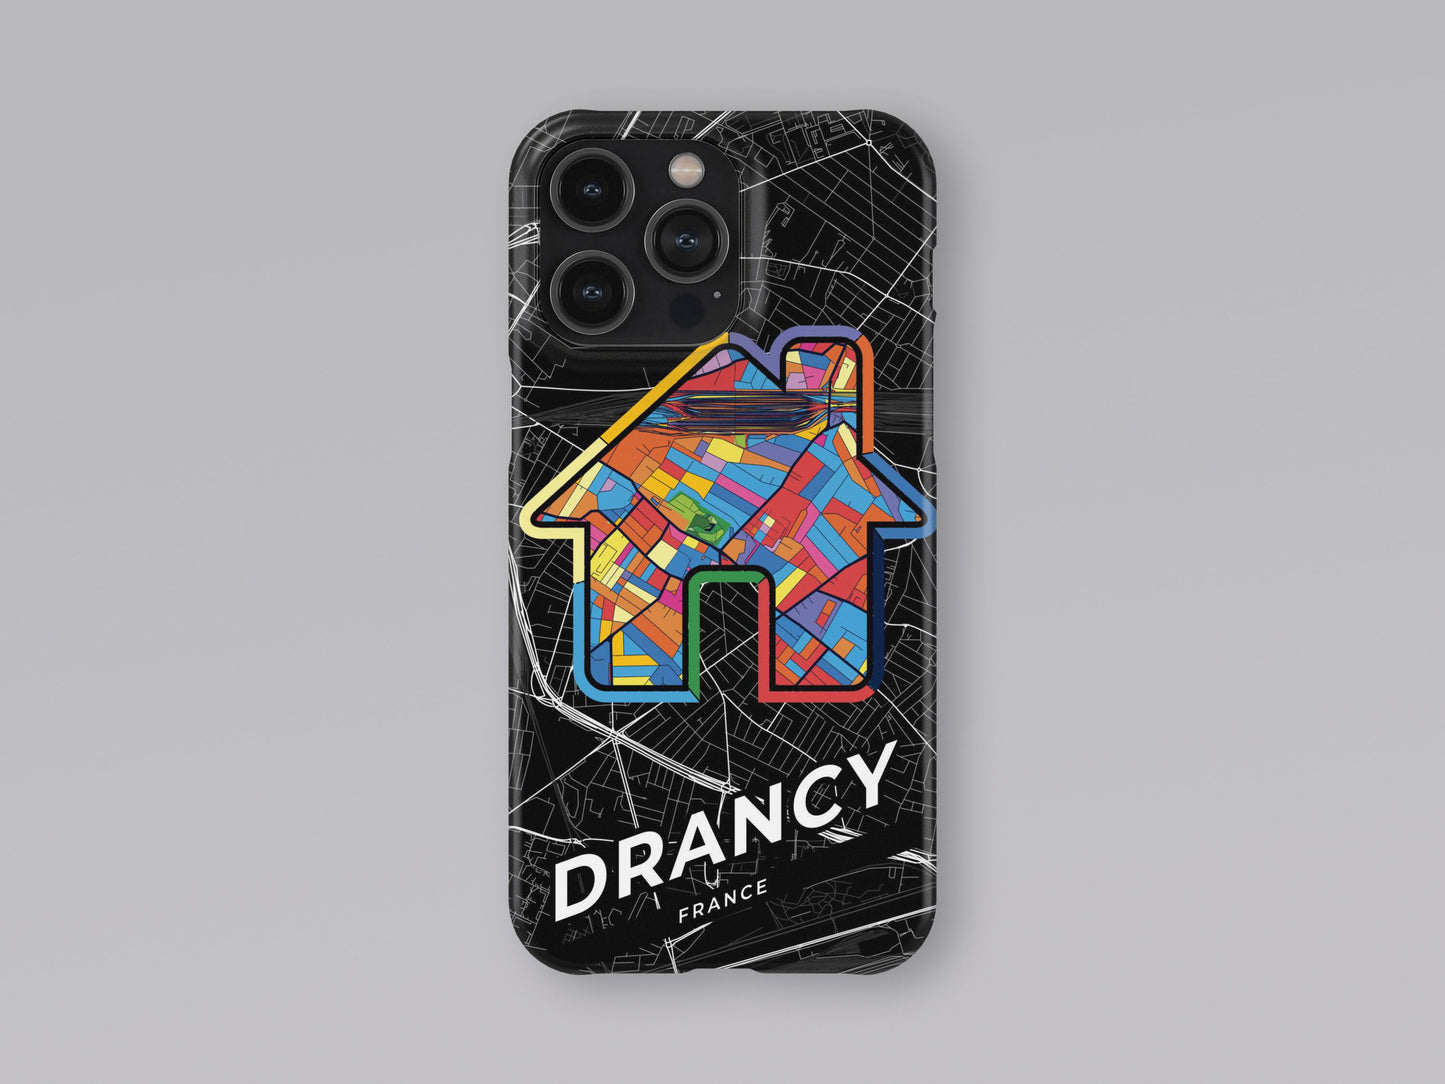 Drancy France slim phone case with colorful icon. Birthday, wedding or housewarming gift. Couple match cases. 3